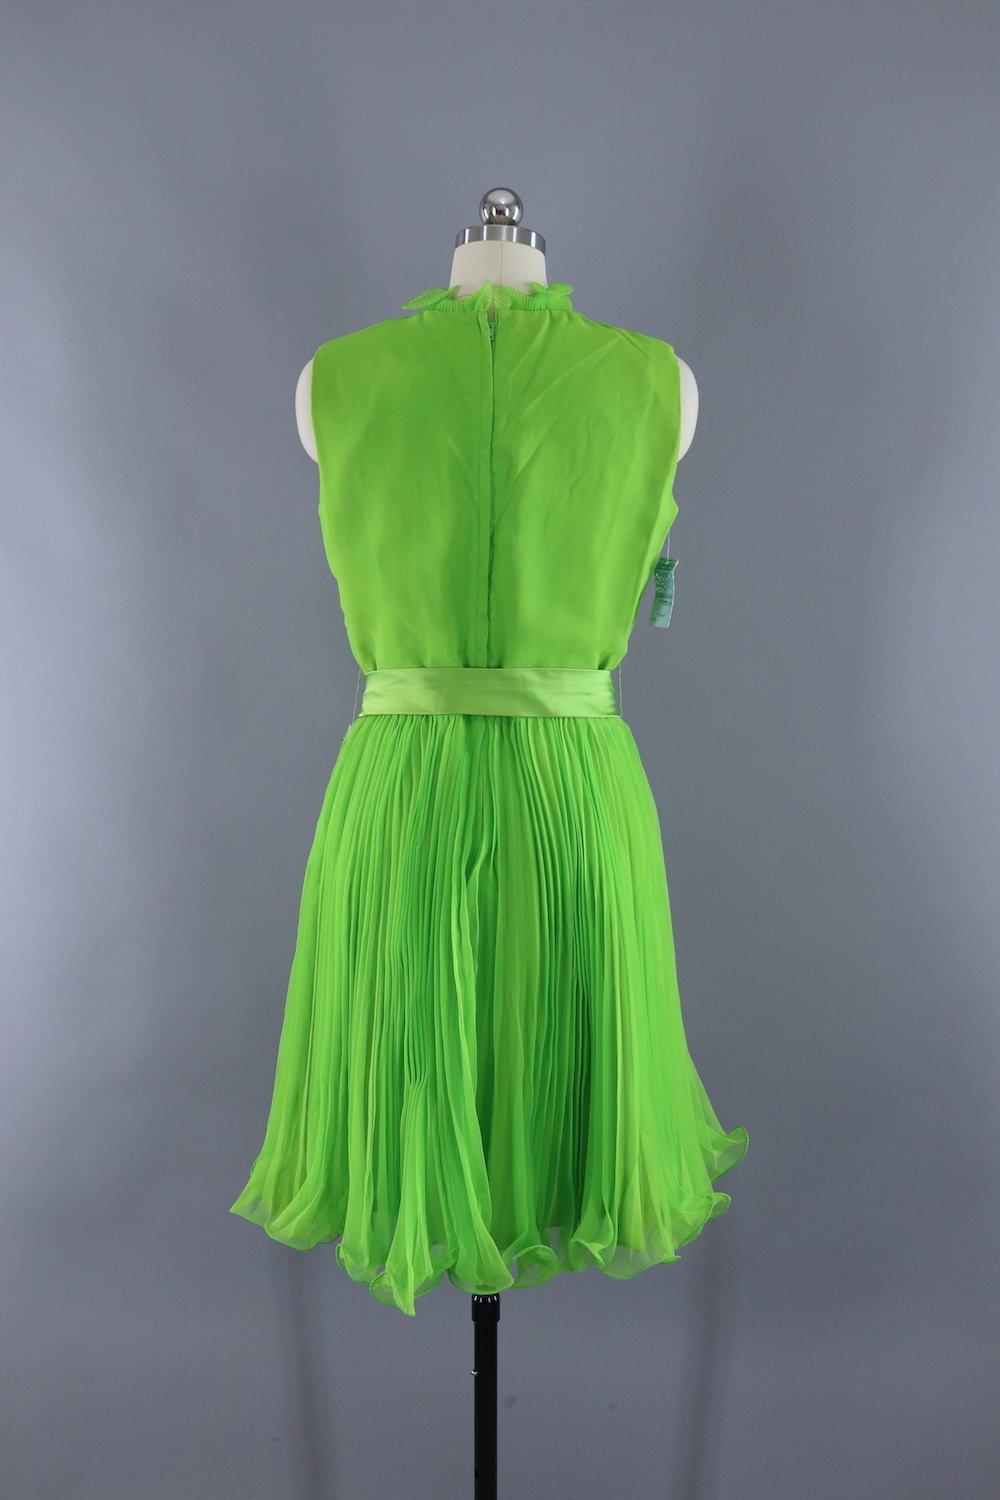 Vintage 1960s Lime Green Cocktial Dress with Original Tags – ThisBlueBird